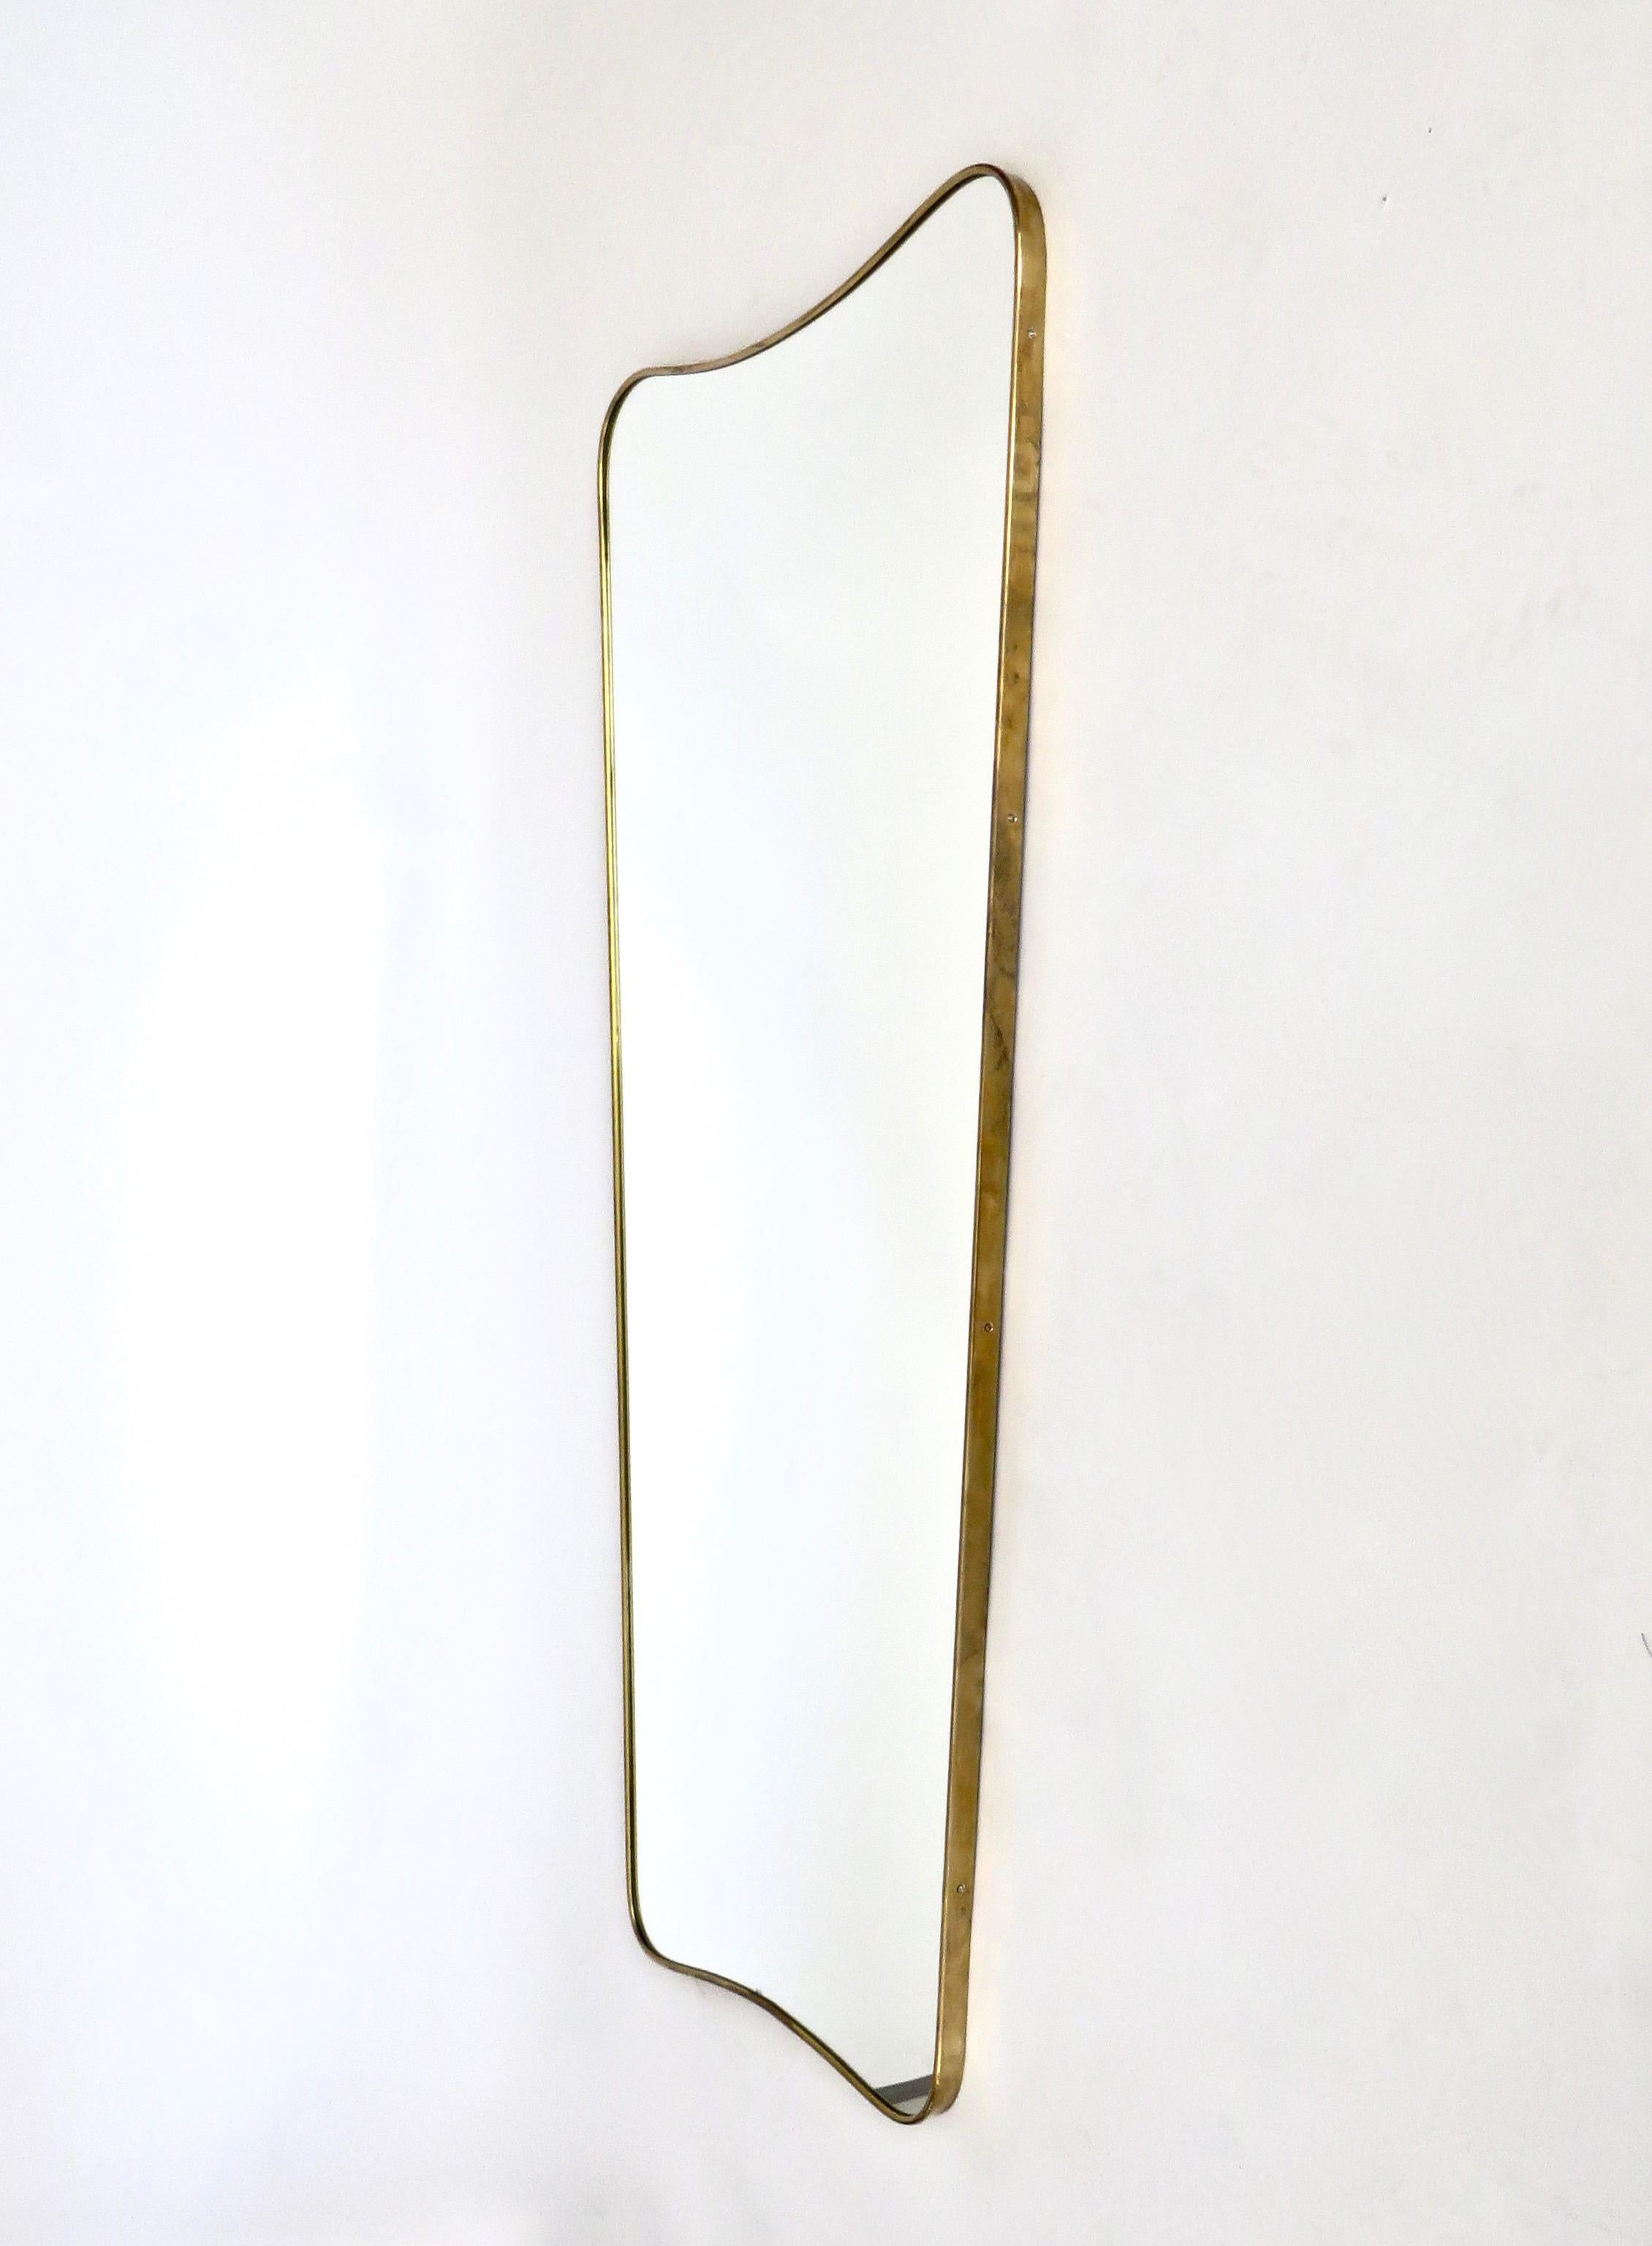 Elegant vintage wall mirror with deep solid brass frame and mirror glass. Made in Italy in the 1940s-1950s, original and not a reproduction.
The brass frame has a very nice patina and may be polished if desired.
At the back the mirror is